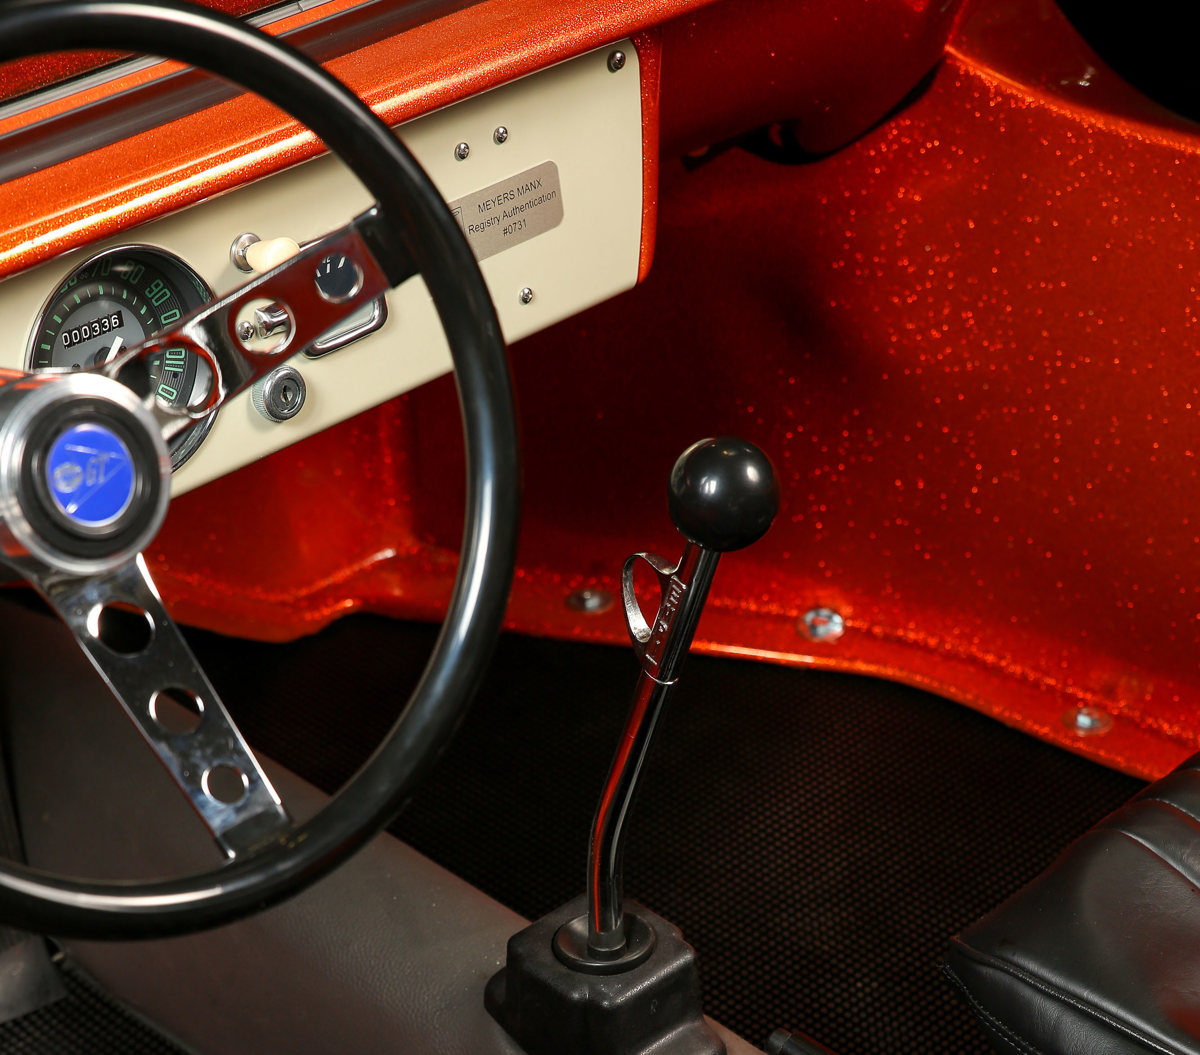 Stickshift of 1968 Meyers Manx offered by RM Sotheby's in an online-only format 2019